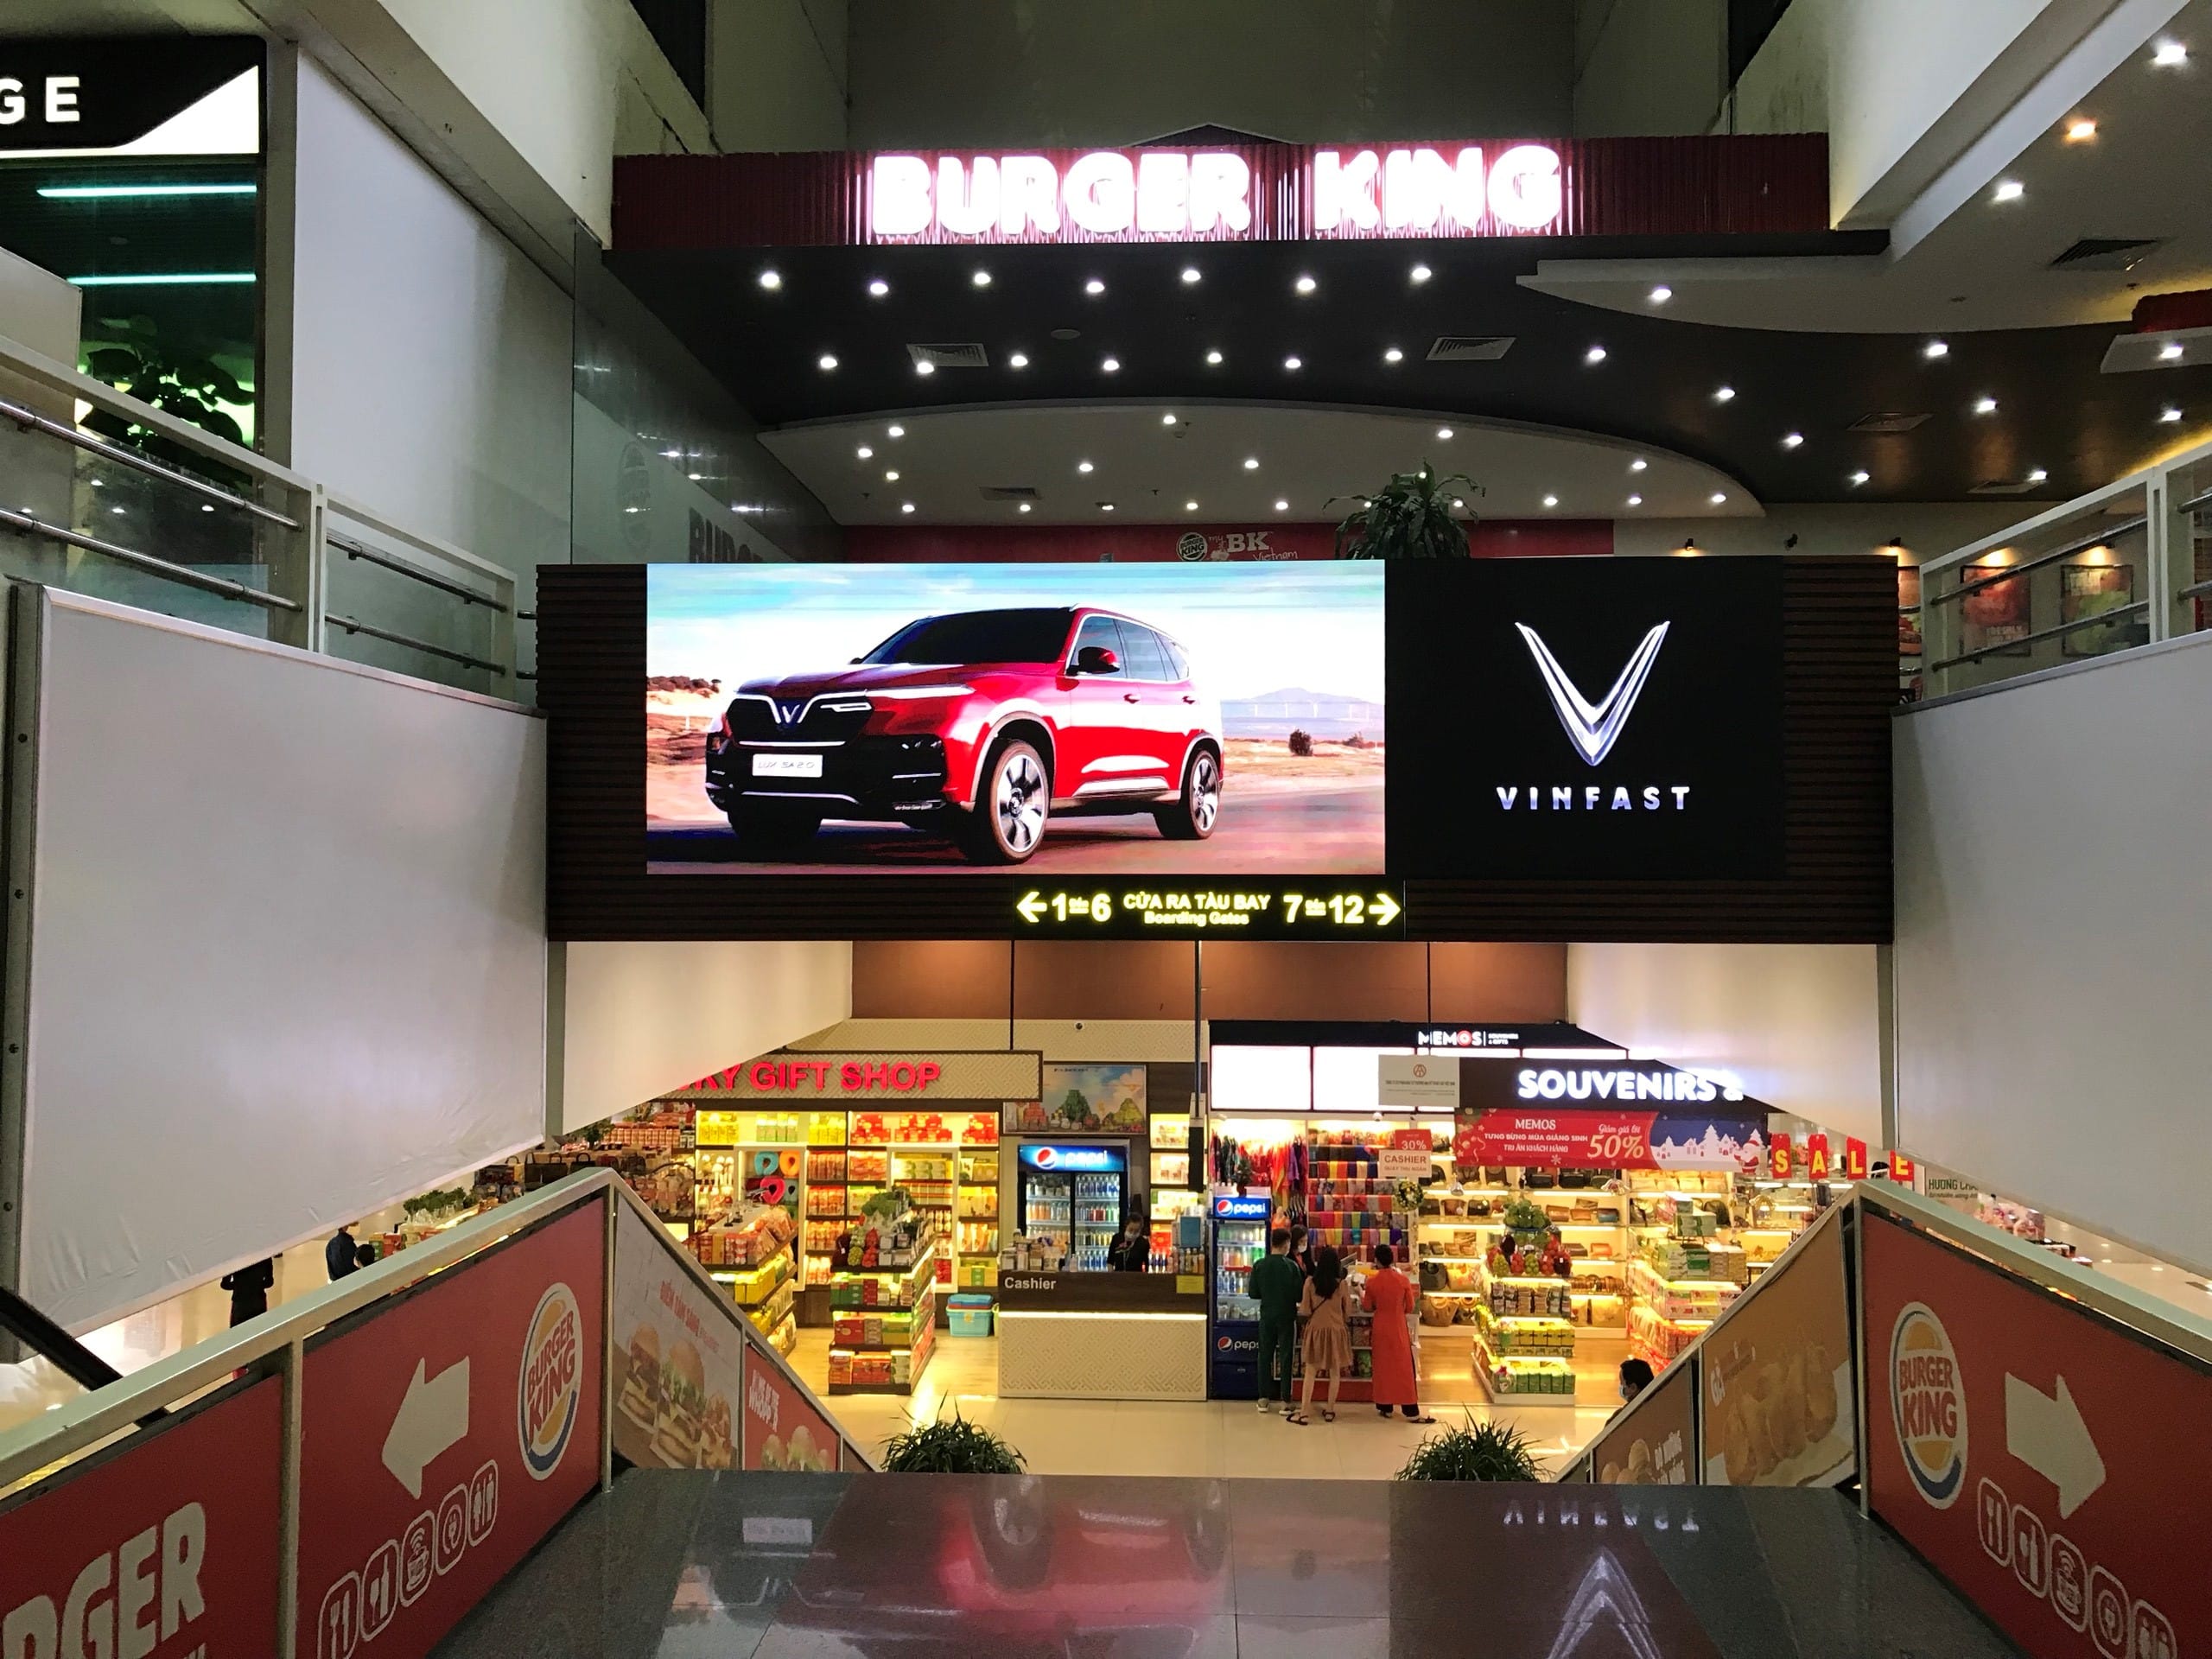 Advertising using LED or LCD screens